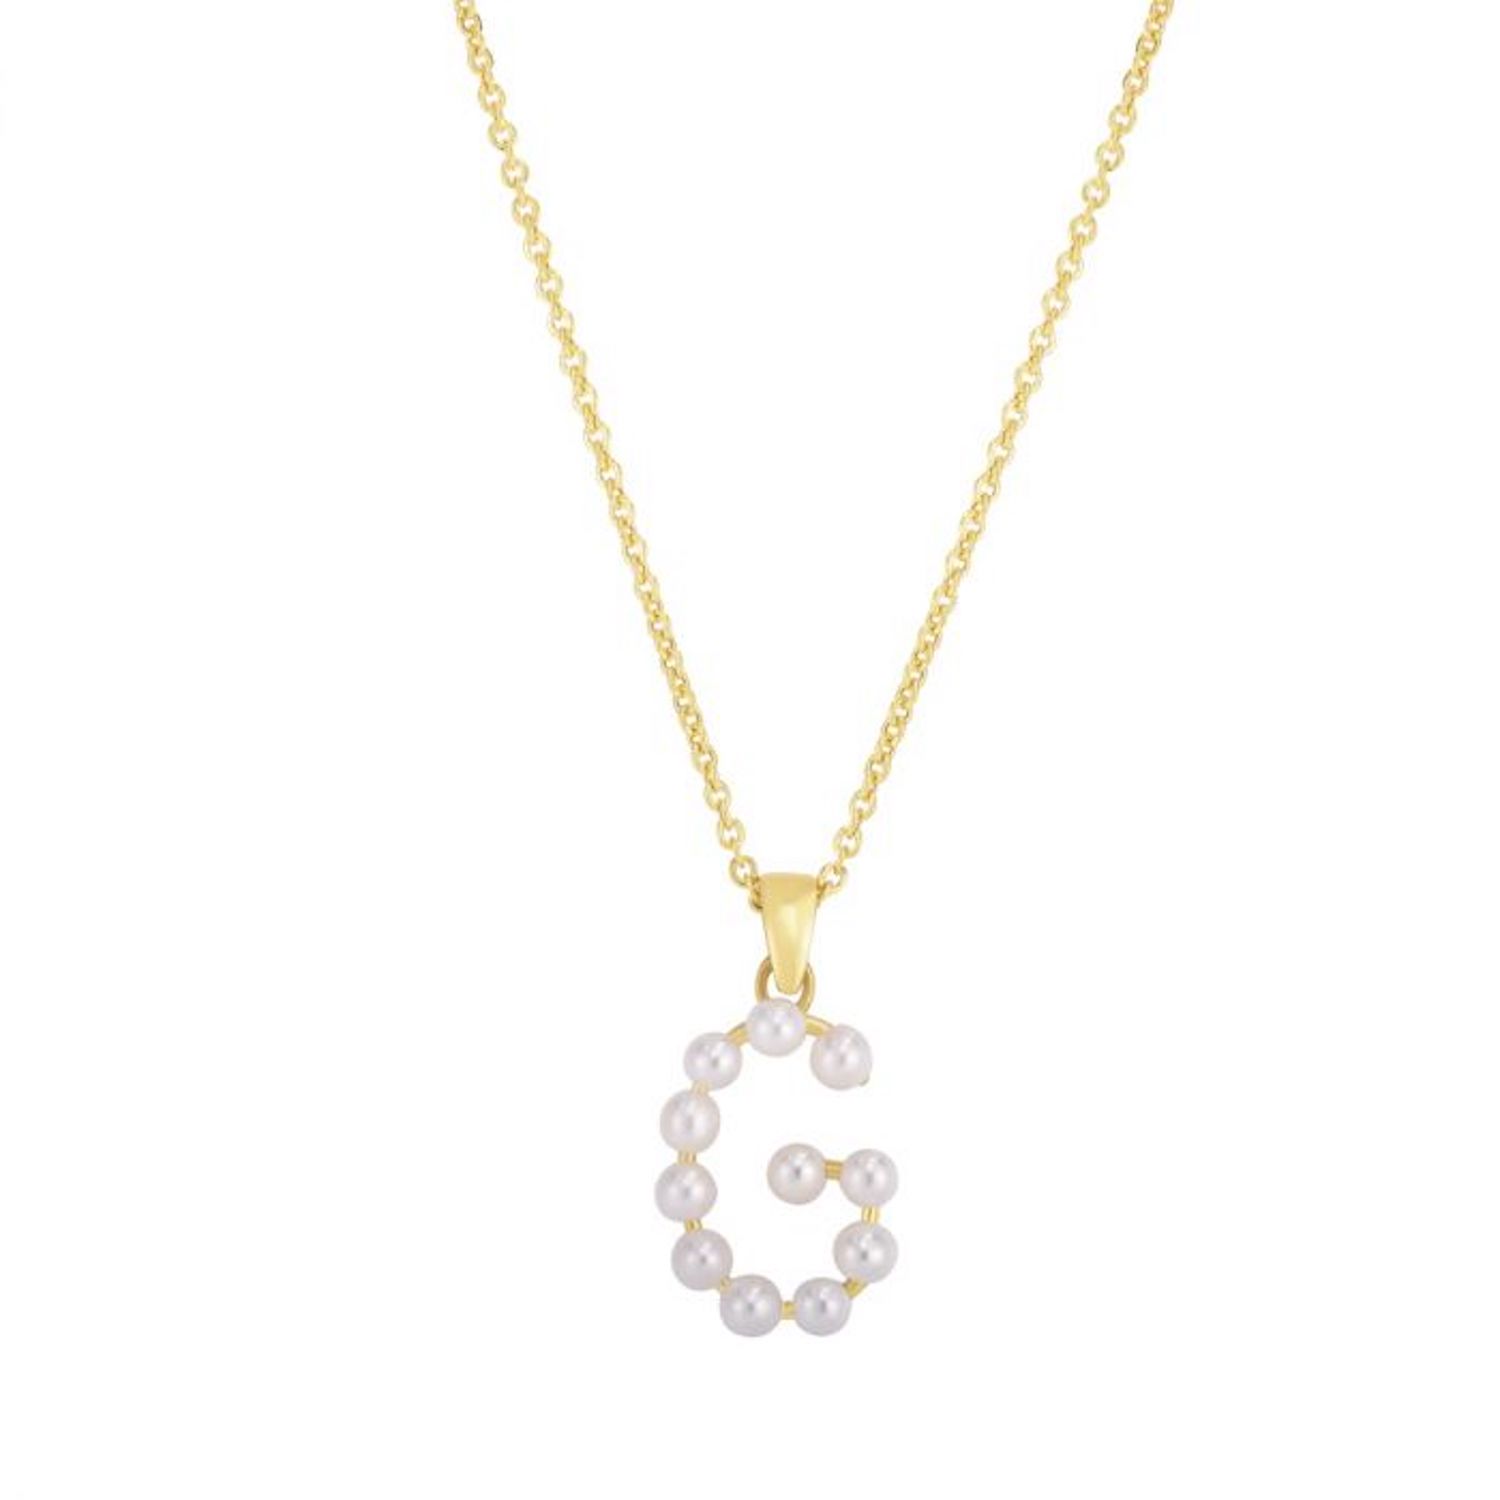 14K Yellow Gold Cultured Pearl Initials Letter Pendant Necklace 18" - G